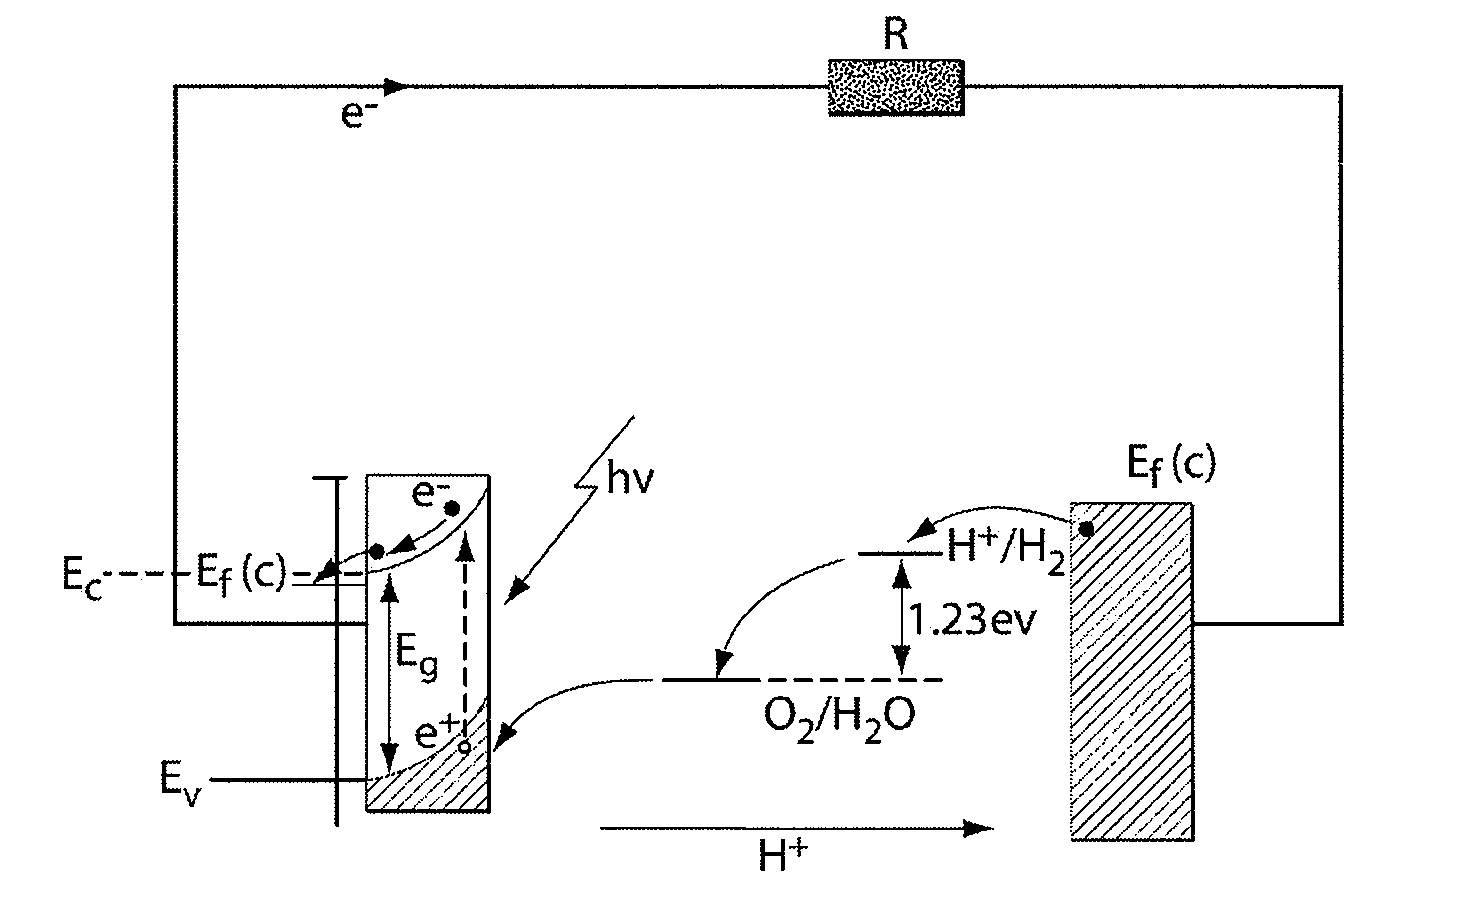 Catalytic materials, photoanodes, and photoelectrochemical cells for water electrolysis and other electrochemical techniques